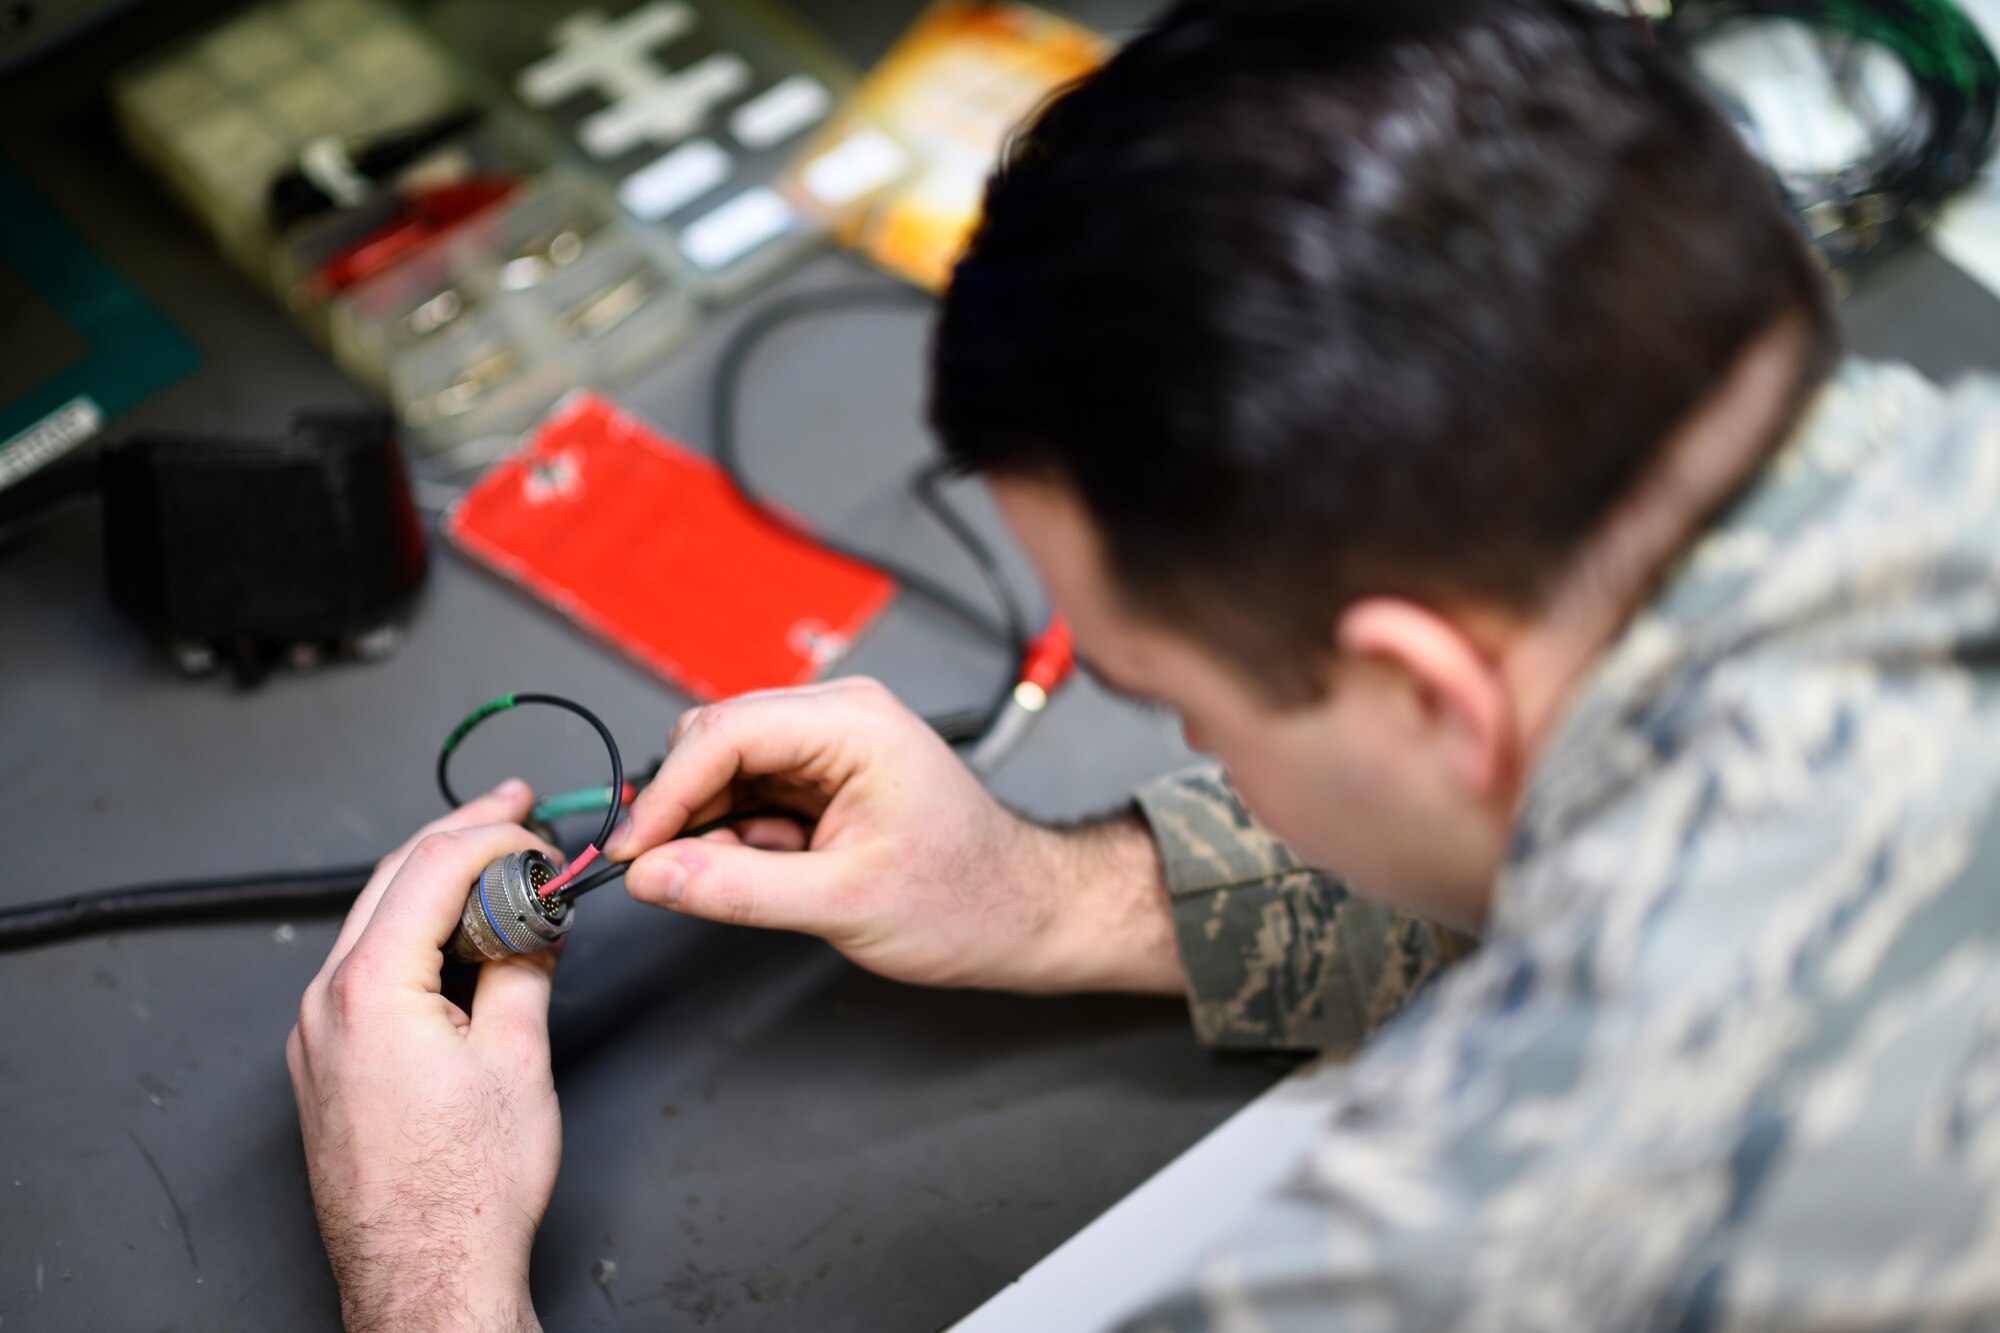 An Airman assigned to the 48th Component Maintenance Squadron’s Electrical and Environmental section uses test leads on a throttle grip during an operations check at Royal Air Force Lakenheath, England, Jan. 23, 2019. The backshop developed a local standard to alleviate the need to send the component to a stateside facility for repair, saving $5,000 each time it’s repaired. (U.S. Air Force photo by Senior Airman Malcolm Mayfield)